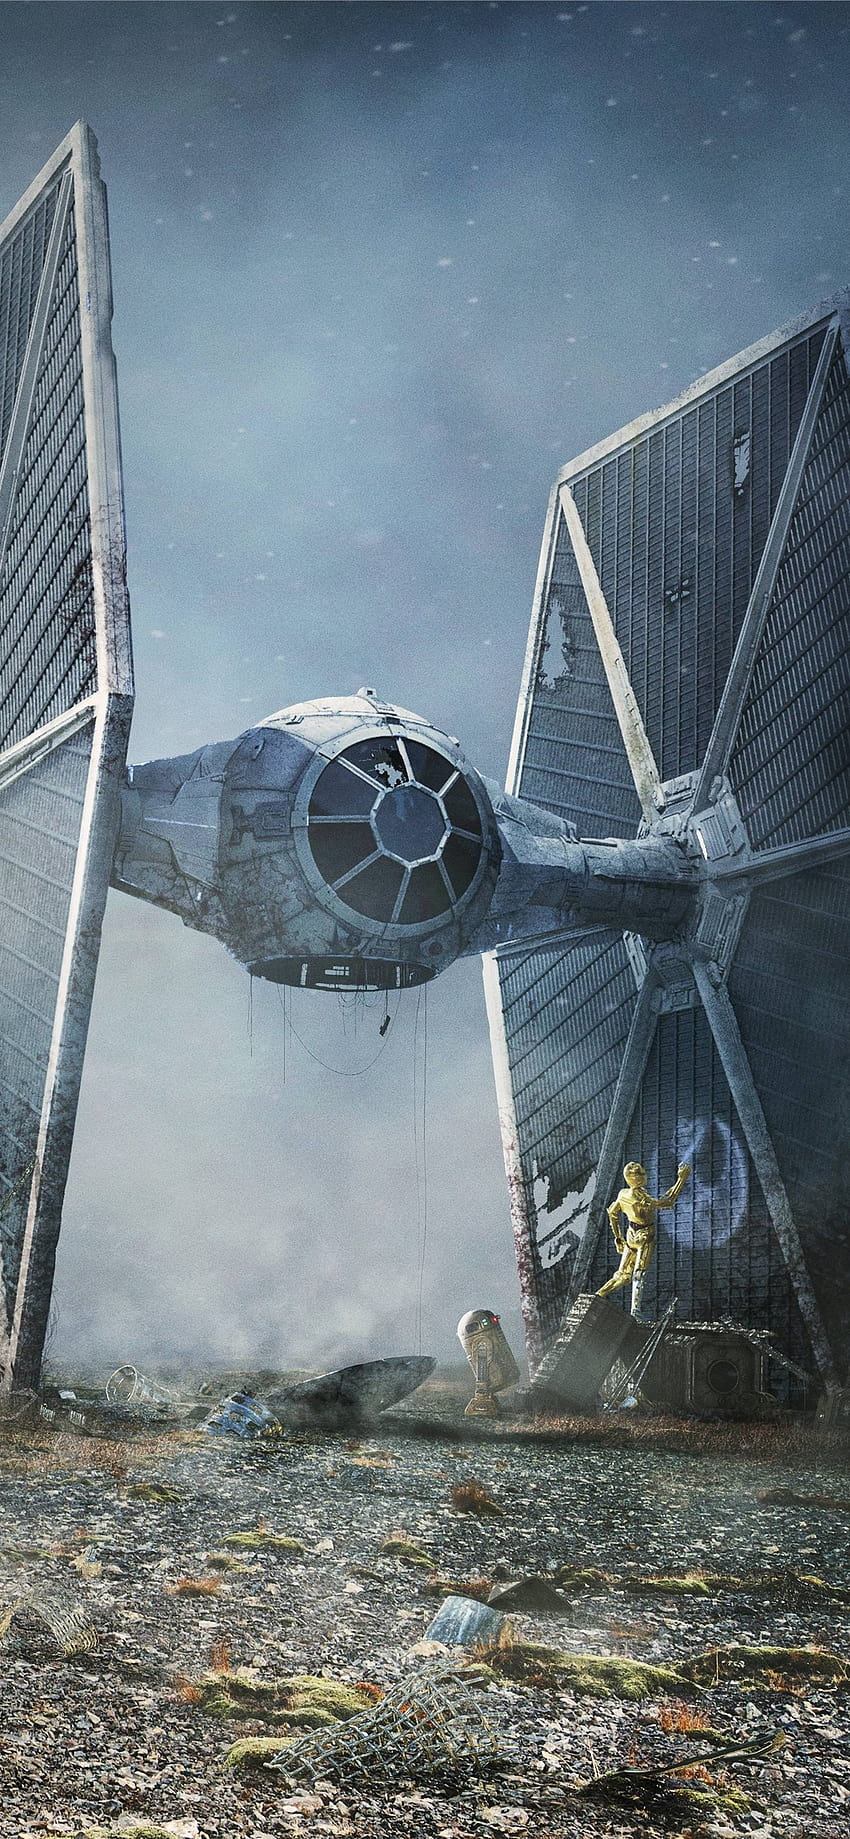 Scifi C 3PO R2 D2 Star Wars TIE Fighter Sony Xperi... iPhone, r2 iphone HD phone wallpaper